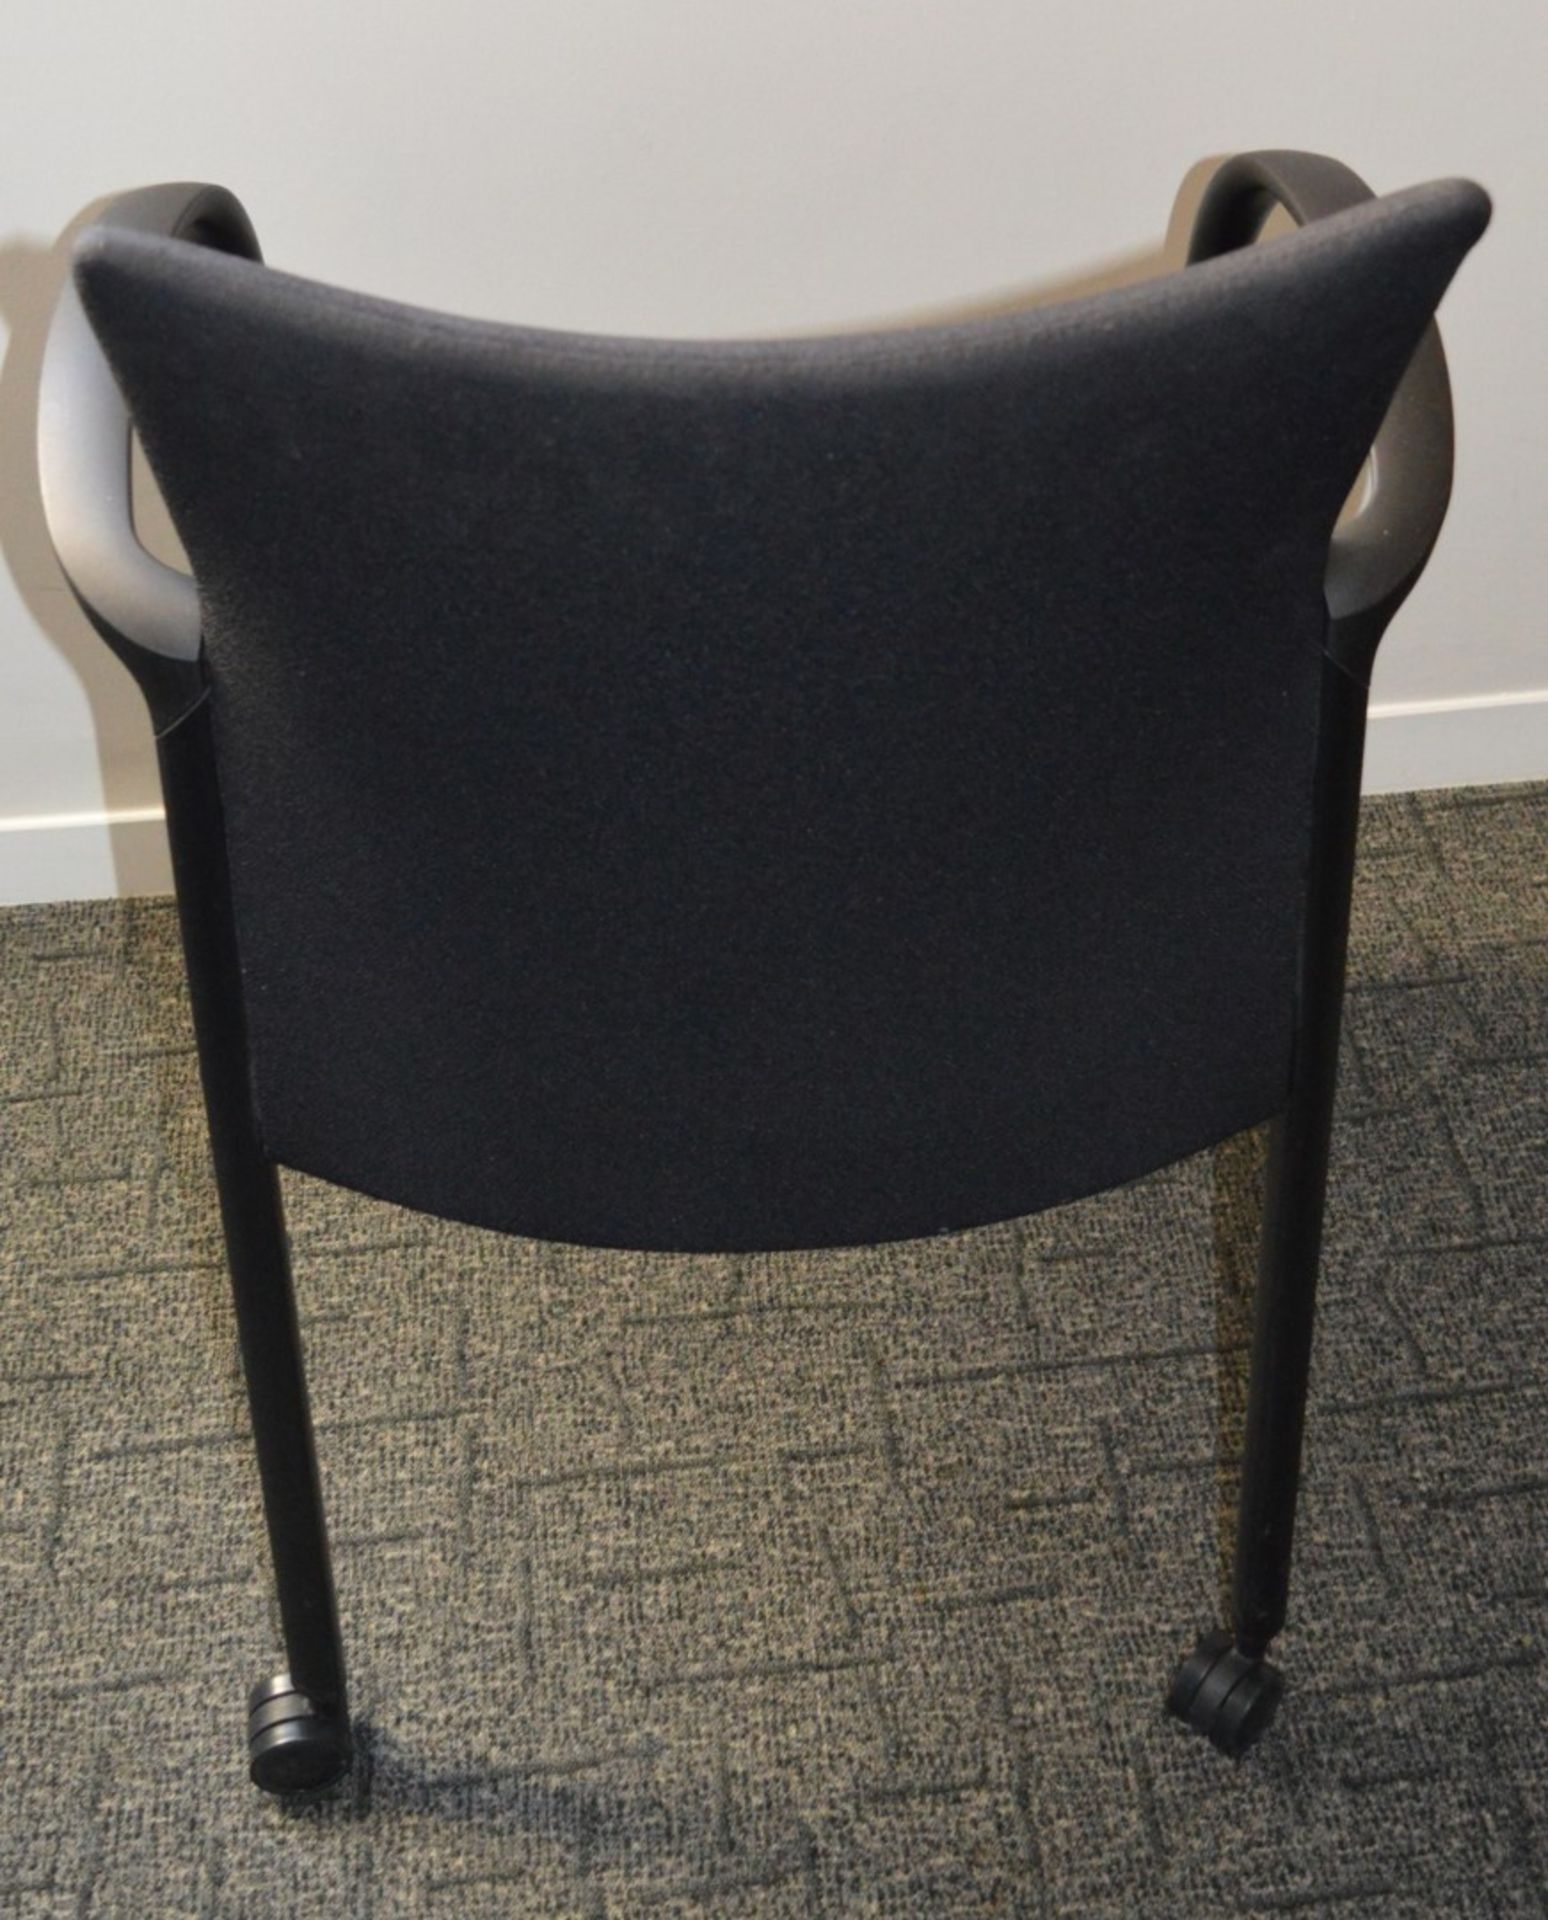 4 x Senator T117A Havana Extreme Office Chairs - Fully Upholstered With Black Frame, Arm Rests and - Image 4 of 6